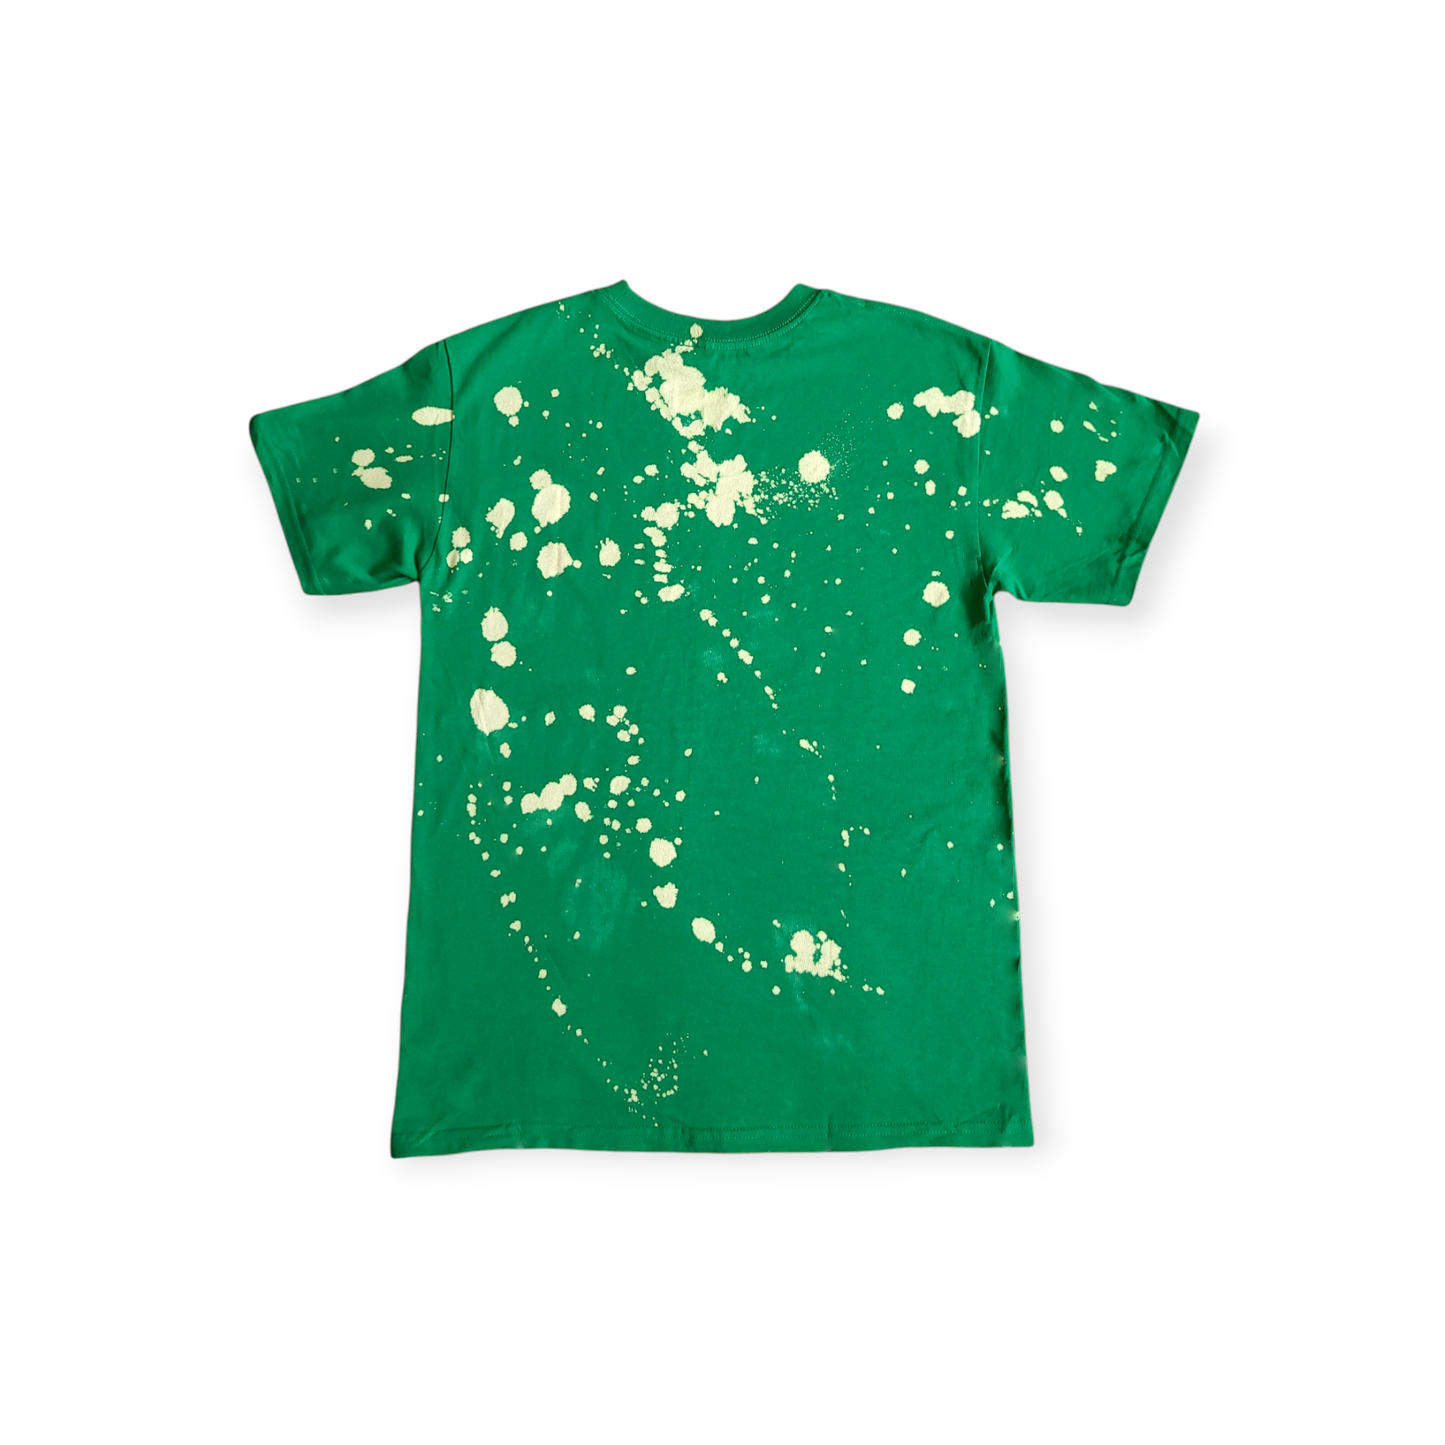 The Stained Brain - Green Gold (Stained) Unisex T-Shirt